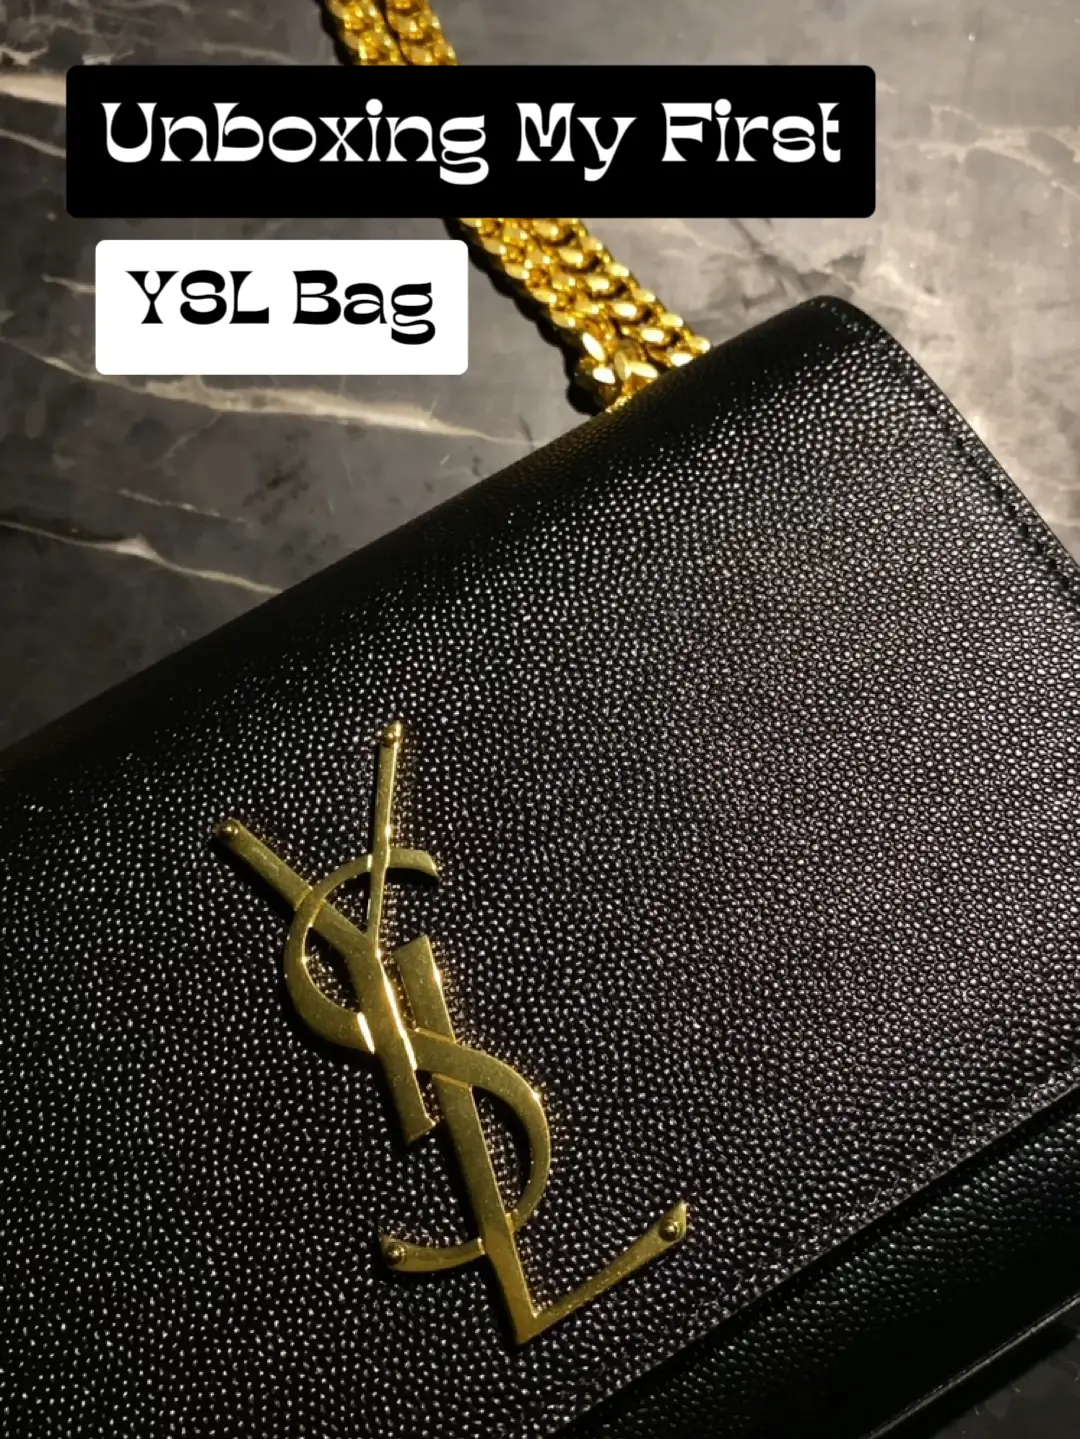 YSL ENVELOPE BAG UNBOXING AND REVIEW YVES SAINT LAURENT BAG REVIEW 